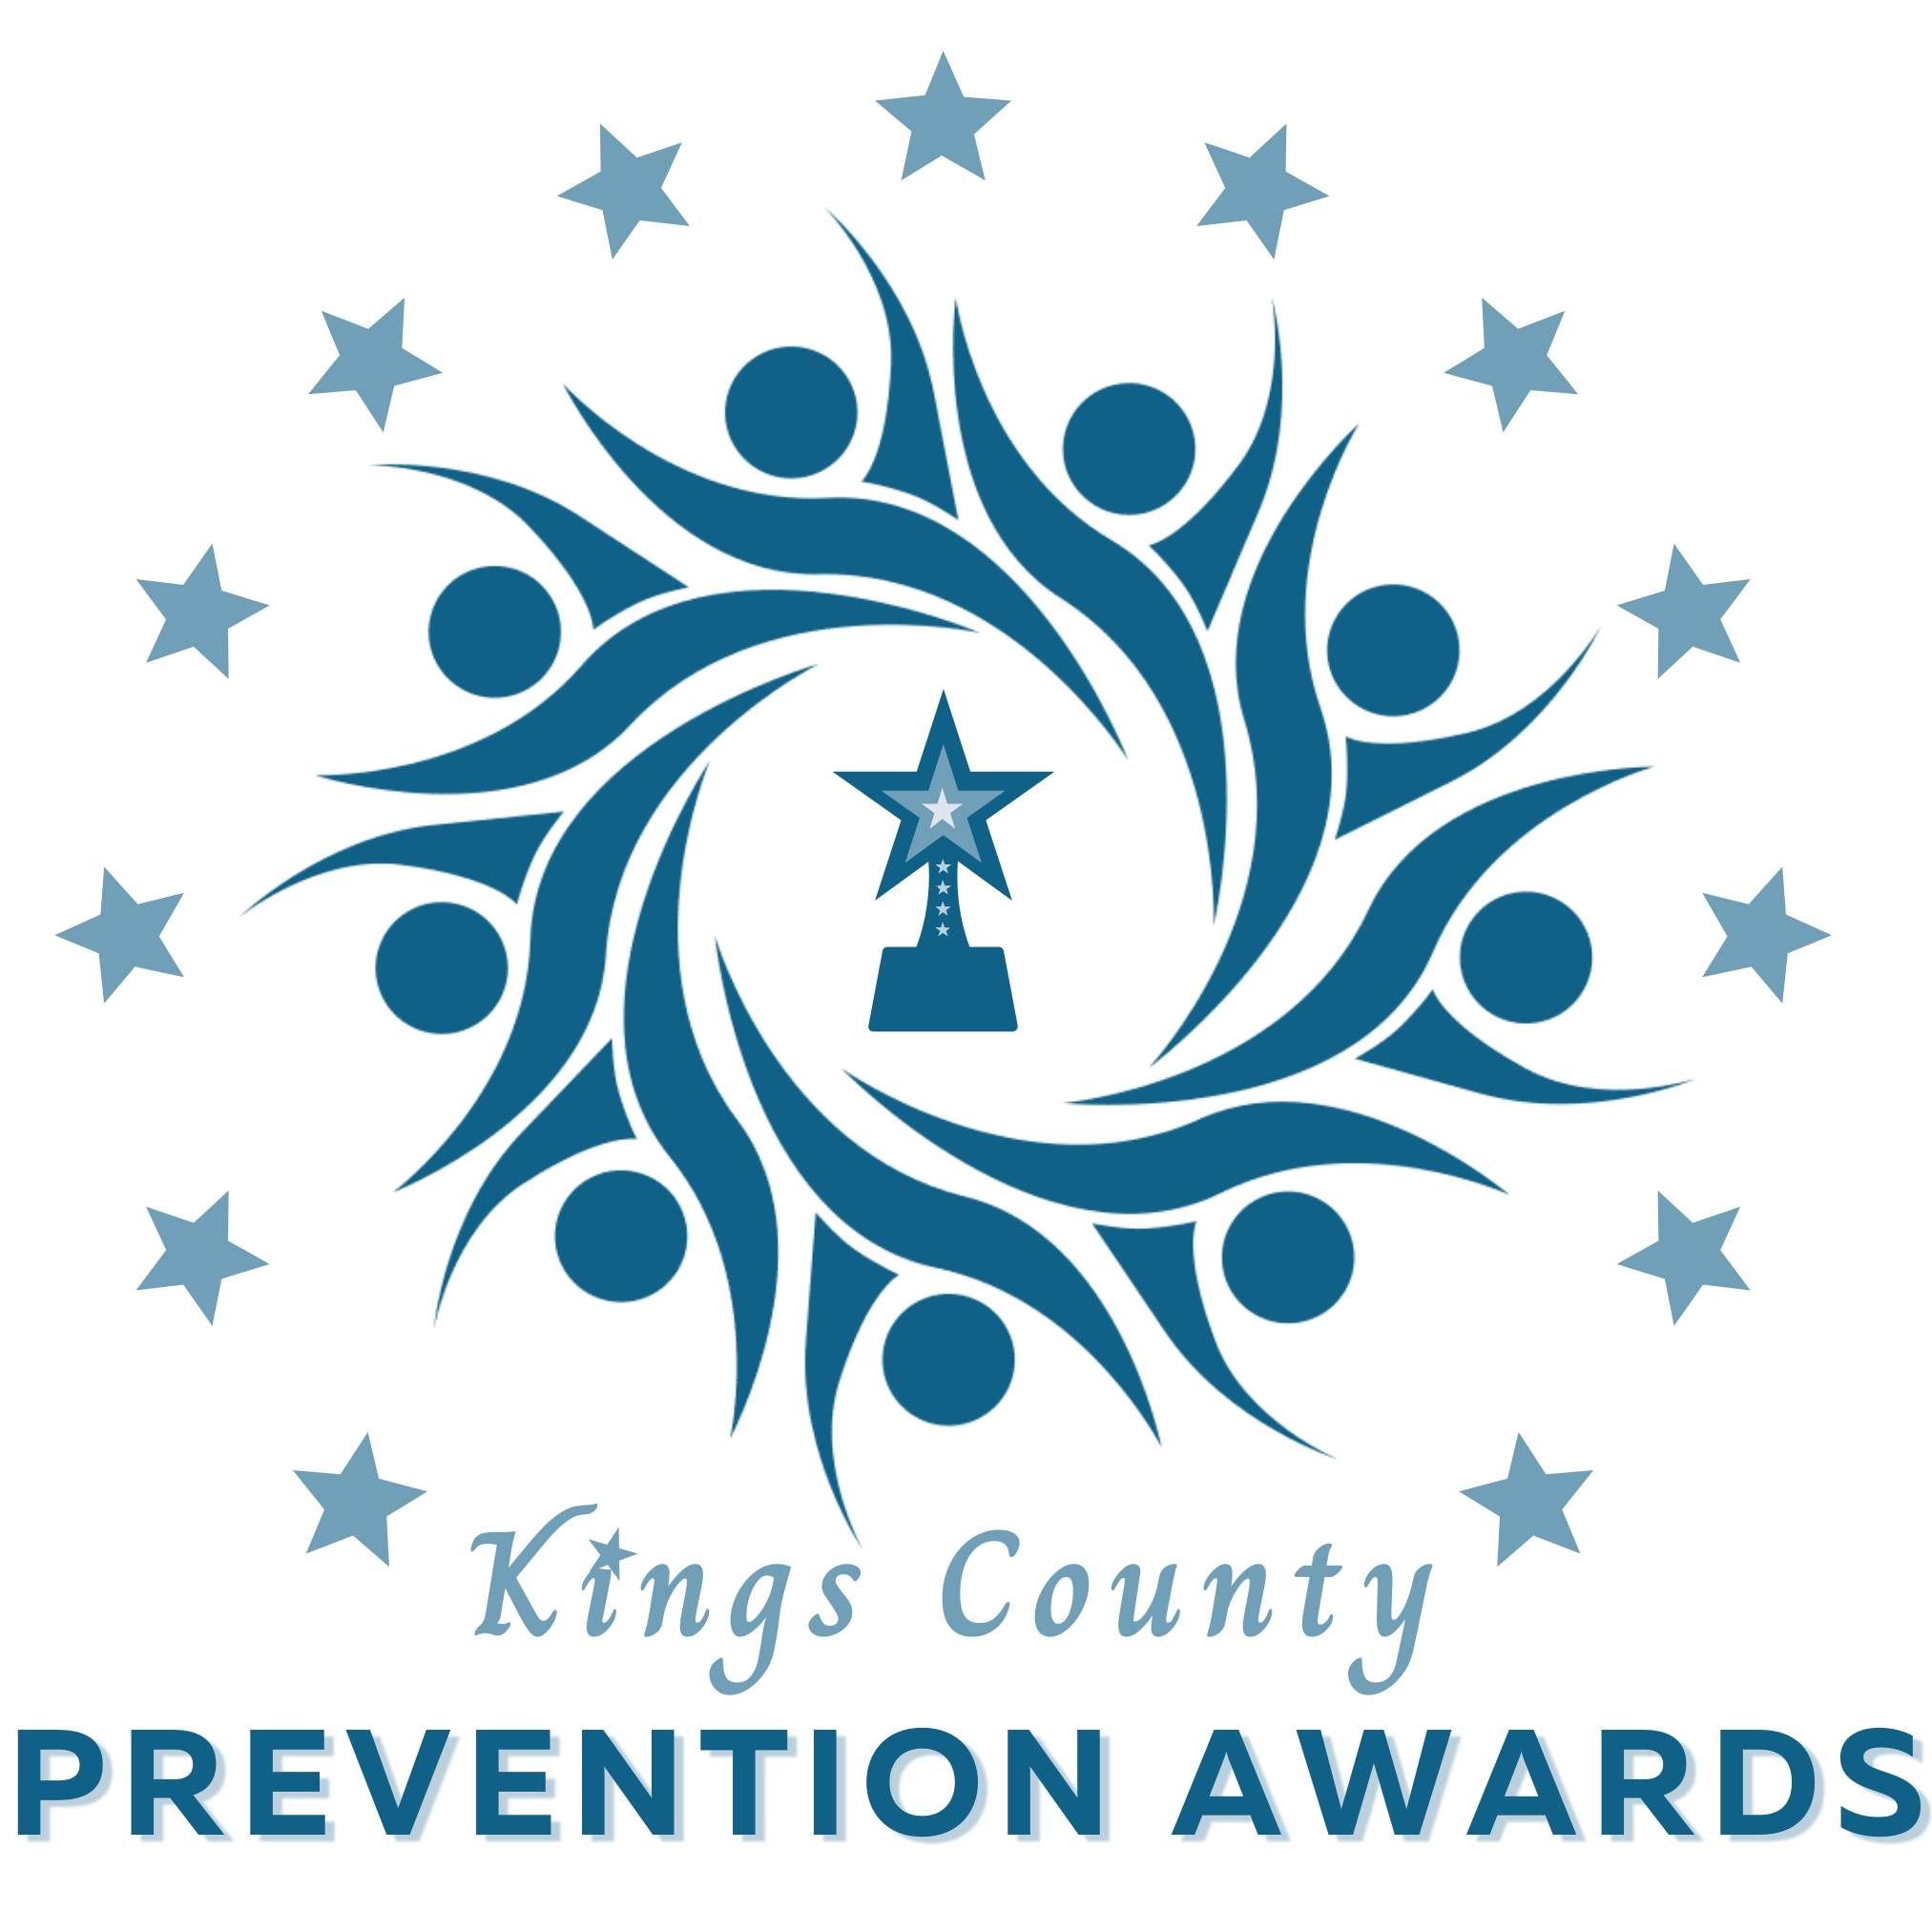 Kings County Prevention Awards